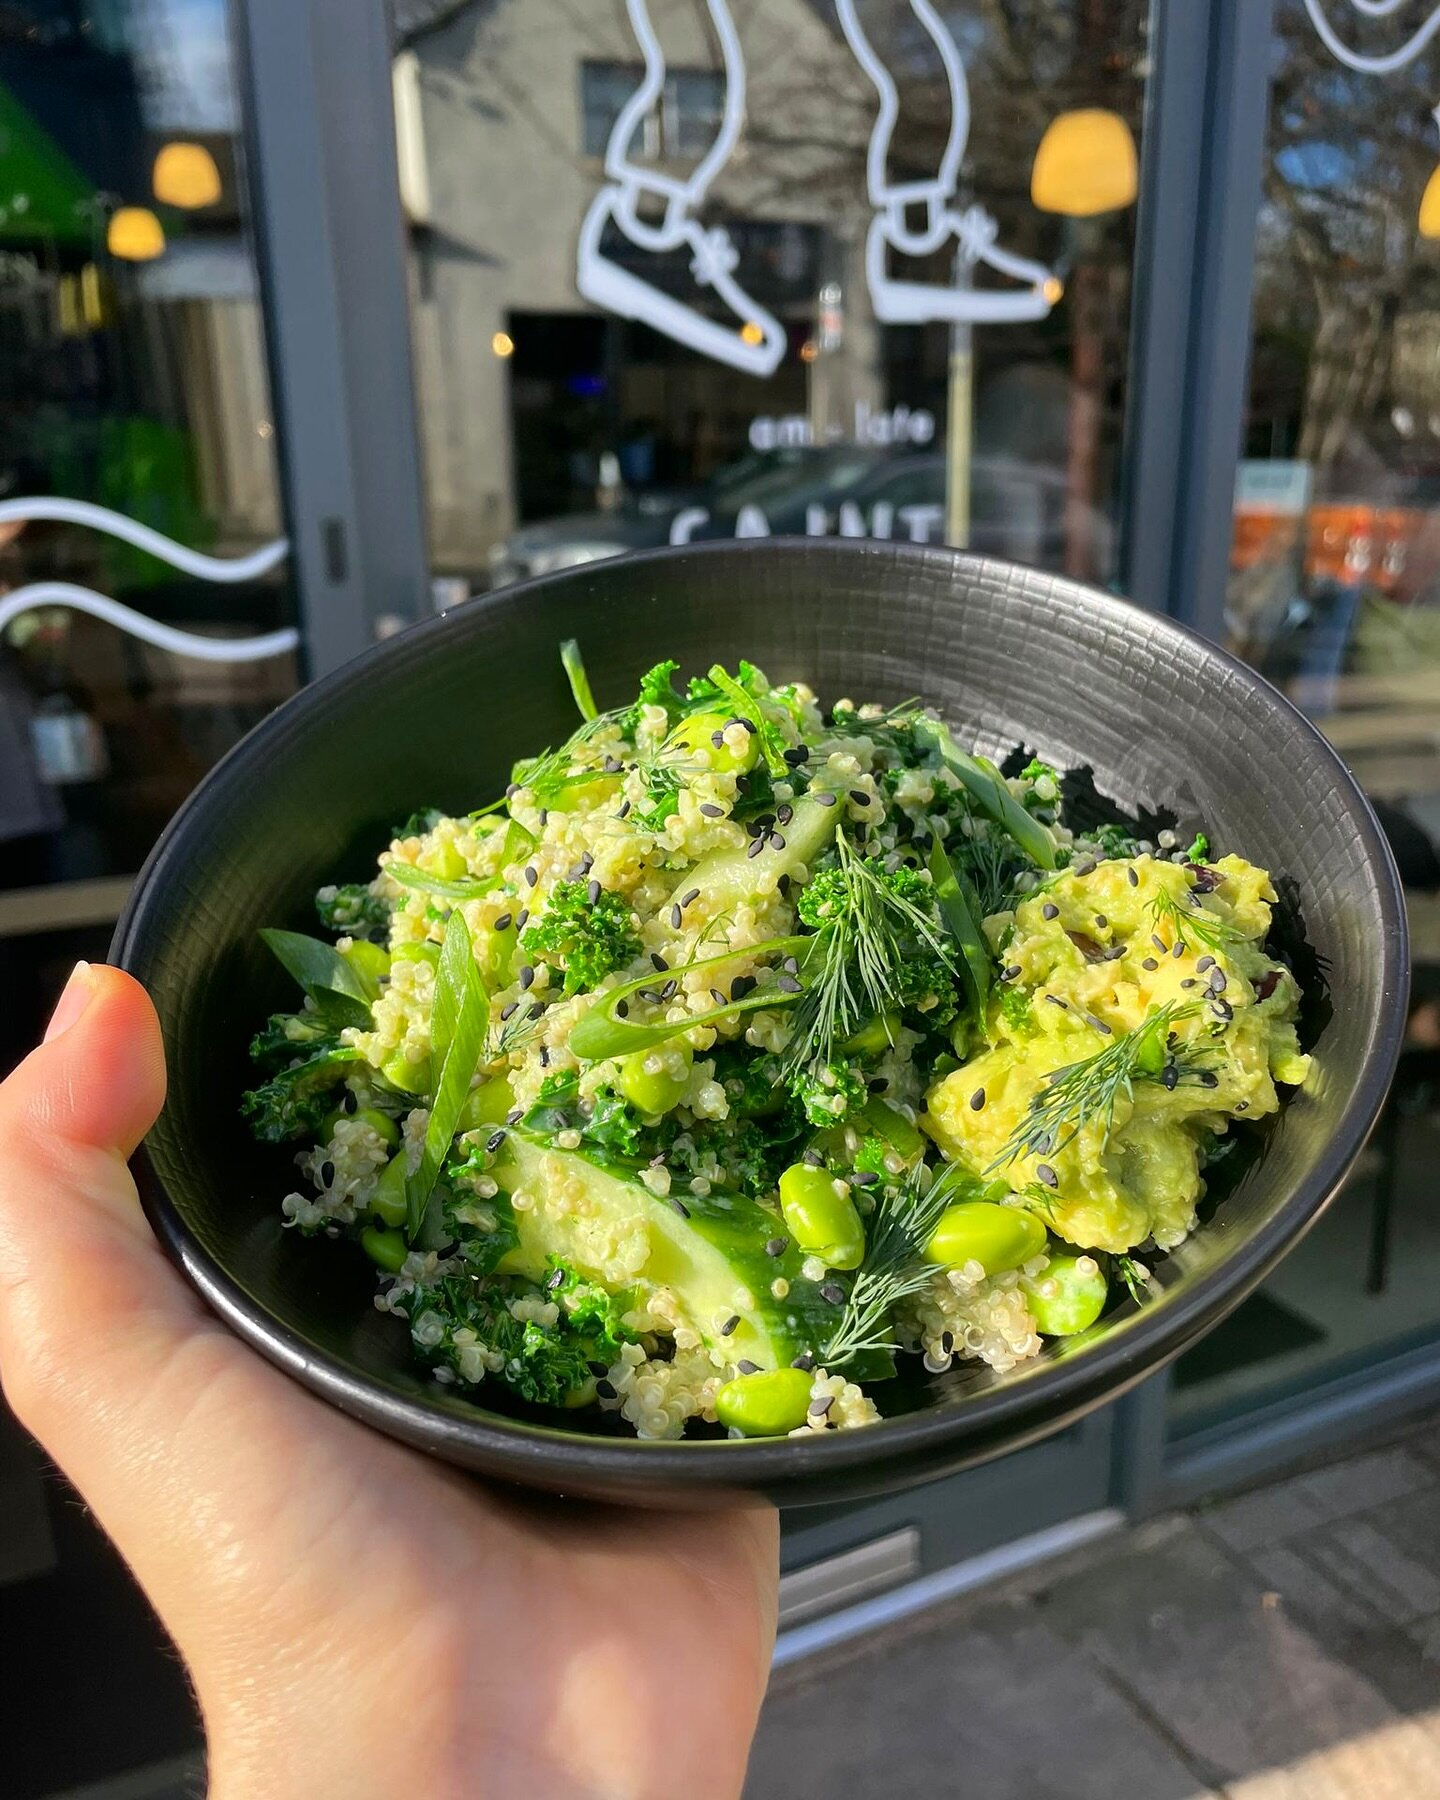 We&rsquo;re back open today so you can start planning your lunch! How about our new Green Goddess Bowl full of goodness? Maybe followed by a donut for balance 🌿🥑🥒🫛🍩😂